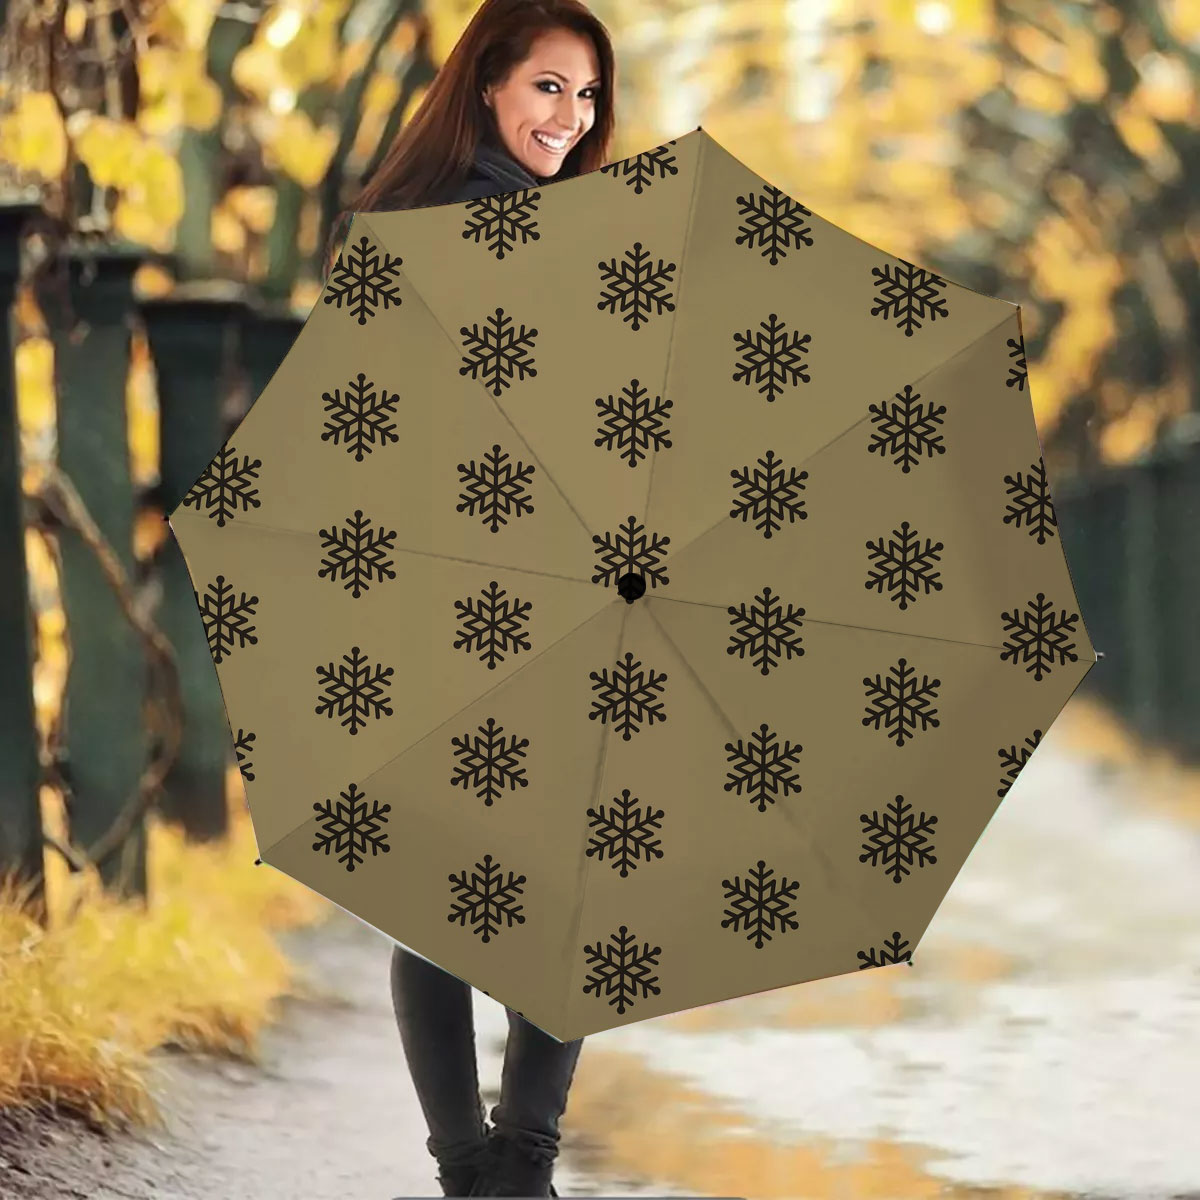 Christmas Snowflake Clipart On The Brown Background Umbrella